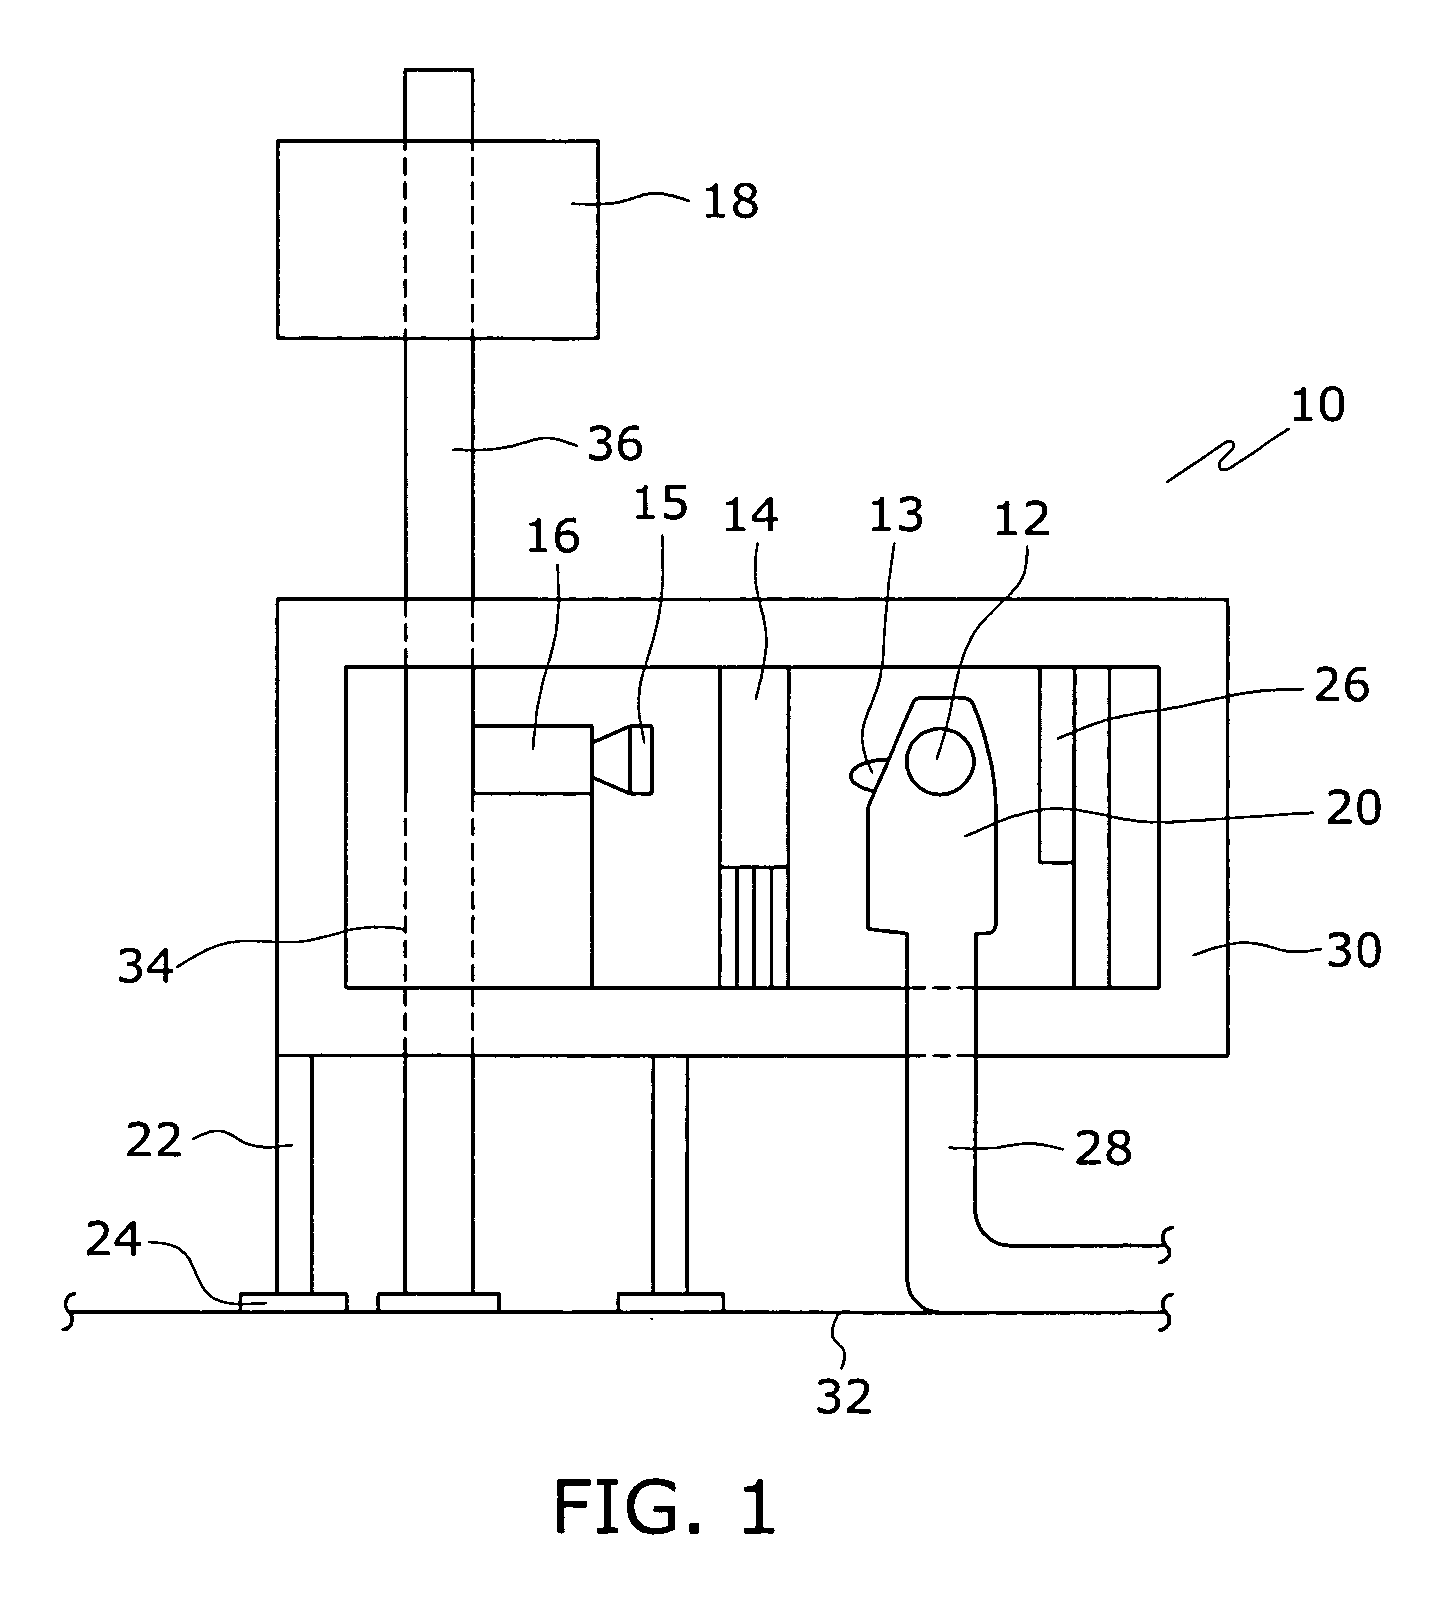 Apparatus and method for inspecting golf balls using spectral analysis